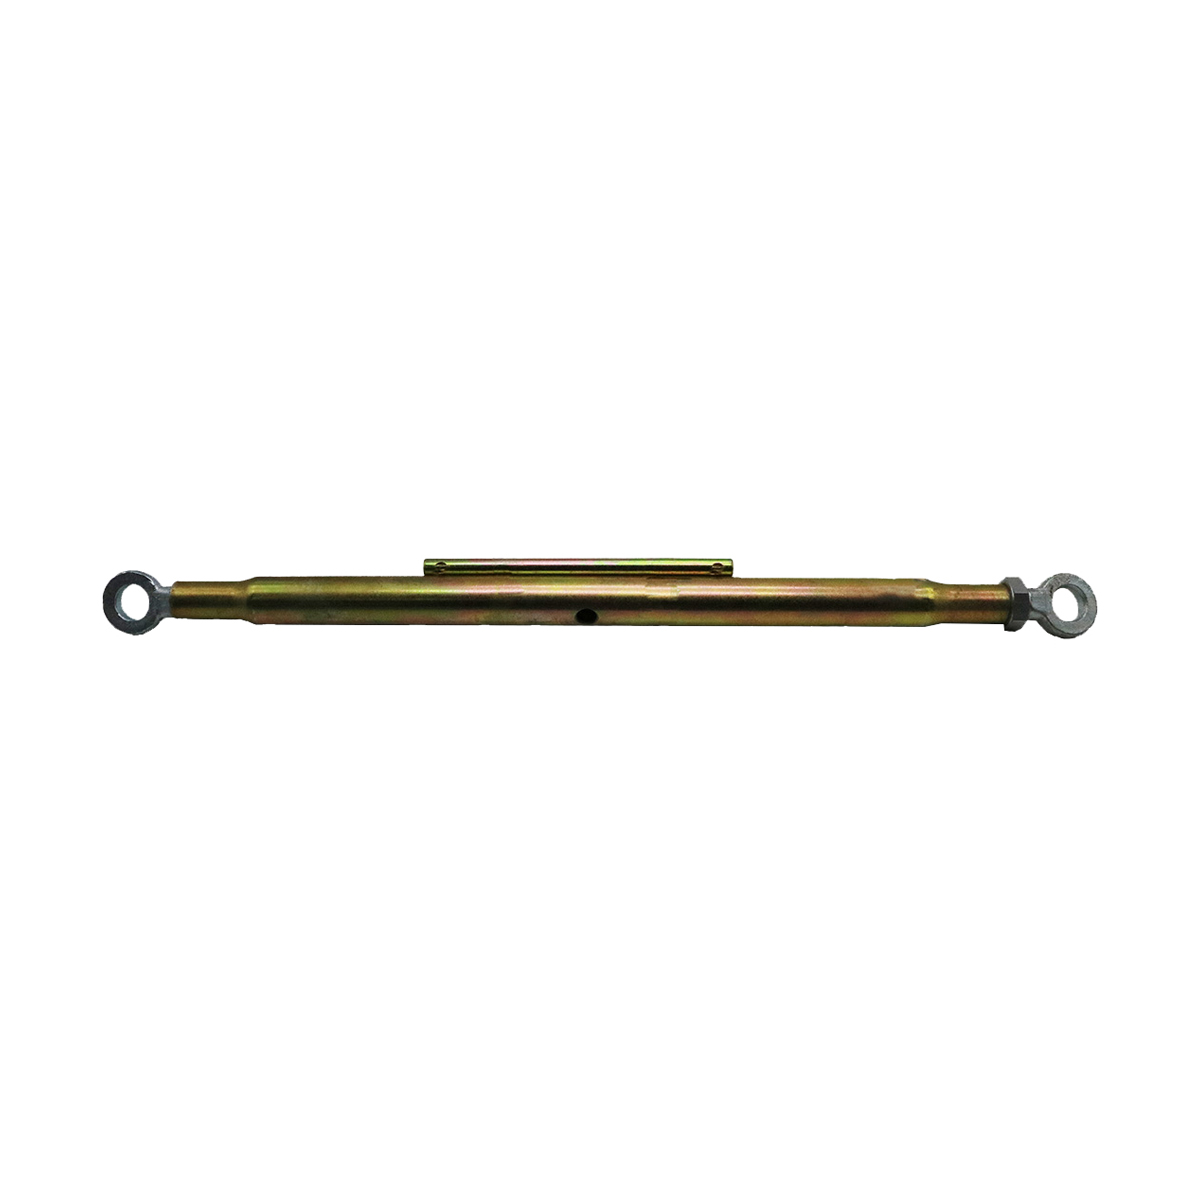 Heavy-duty Adjustable Forged Stabilizer Arm